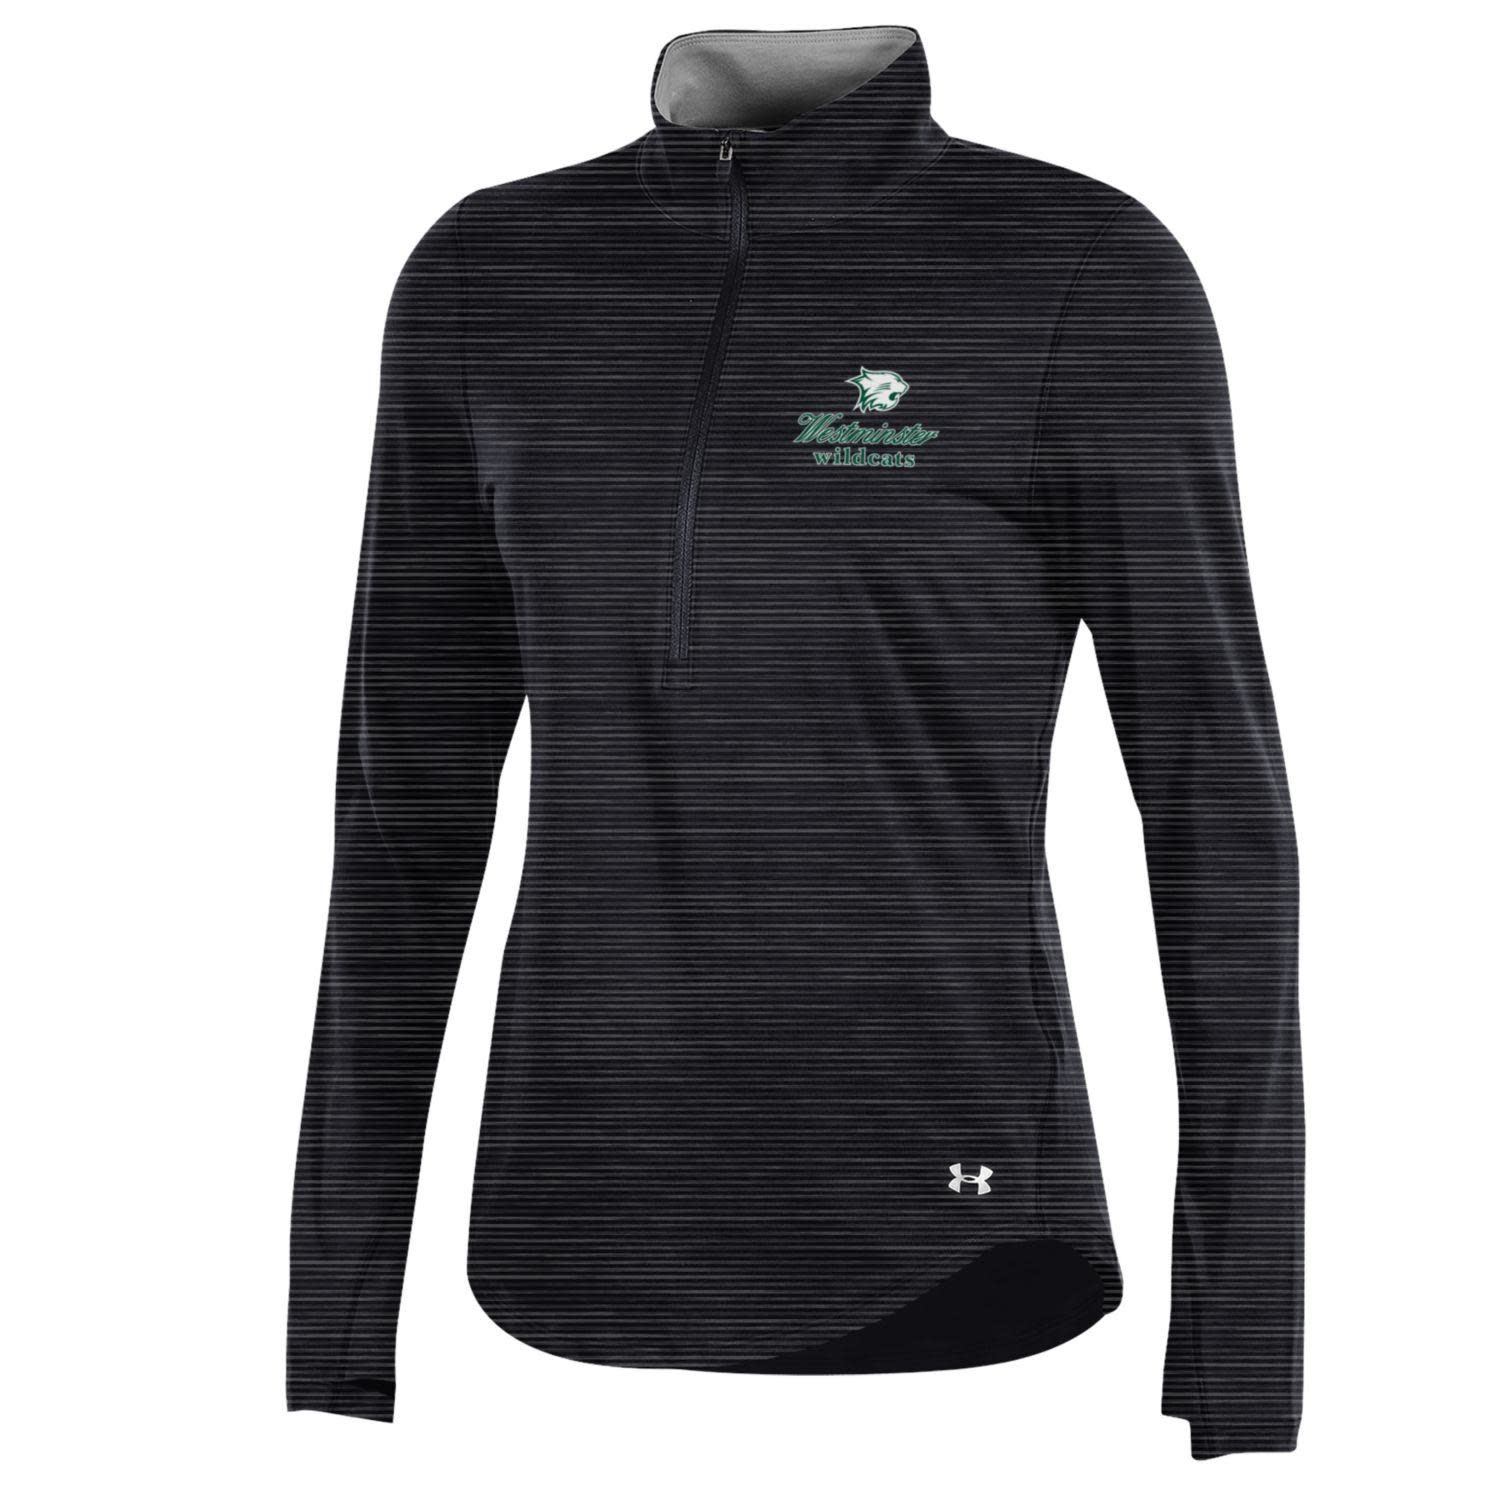 Under Armour Pullover: Women's 1/4 Zip Charged Cotton